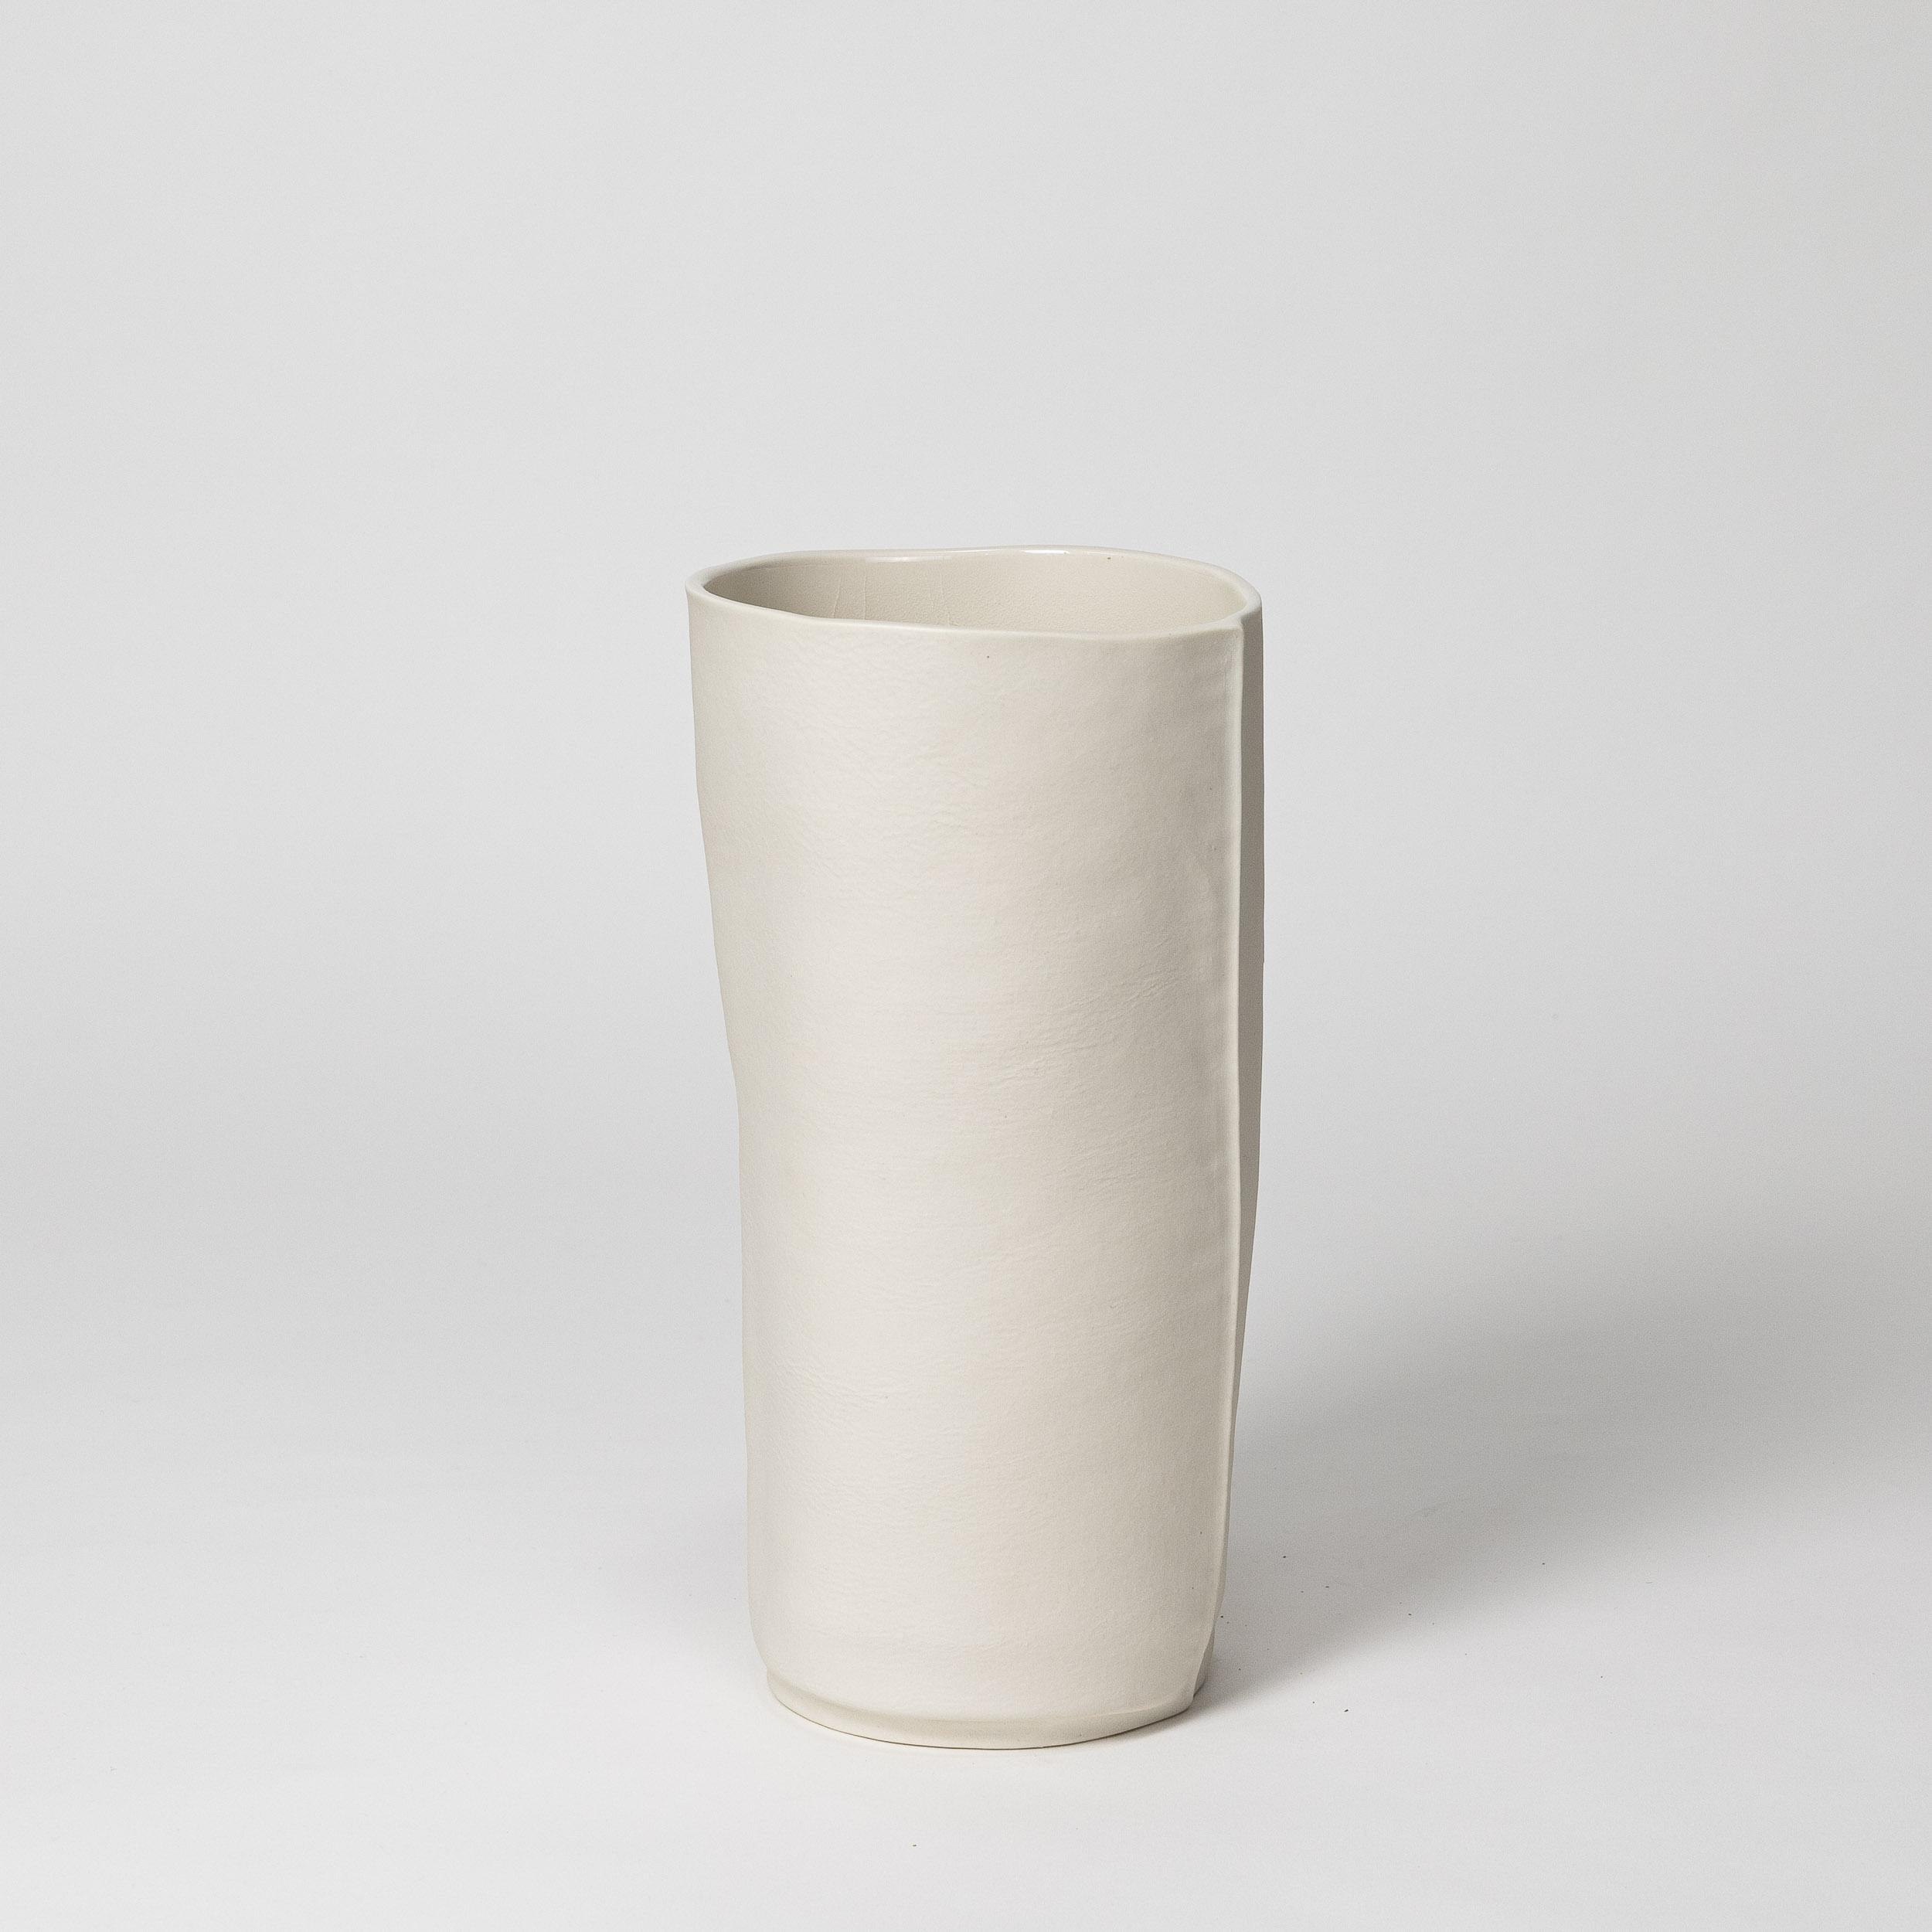 Hand-Crafted Pair of White Porcelain Kawa Vessels, Tactile, Organic, Leather Cast Ceramics For Sale